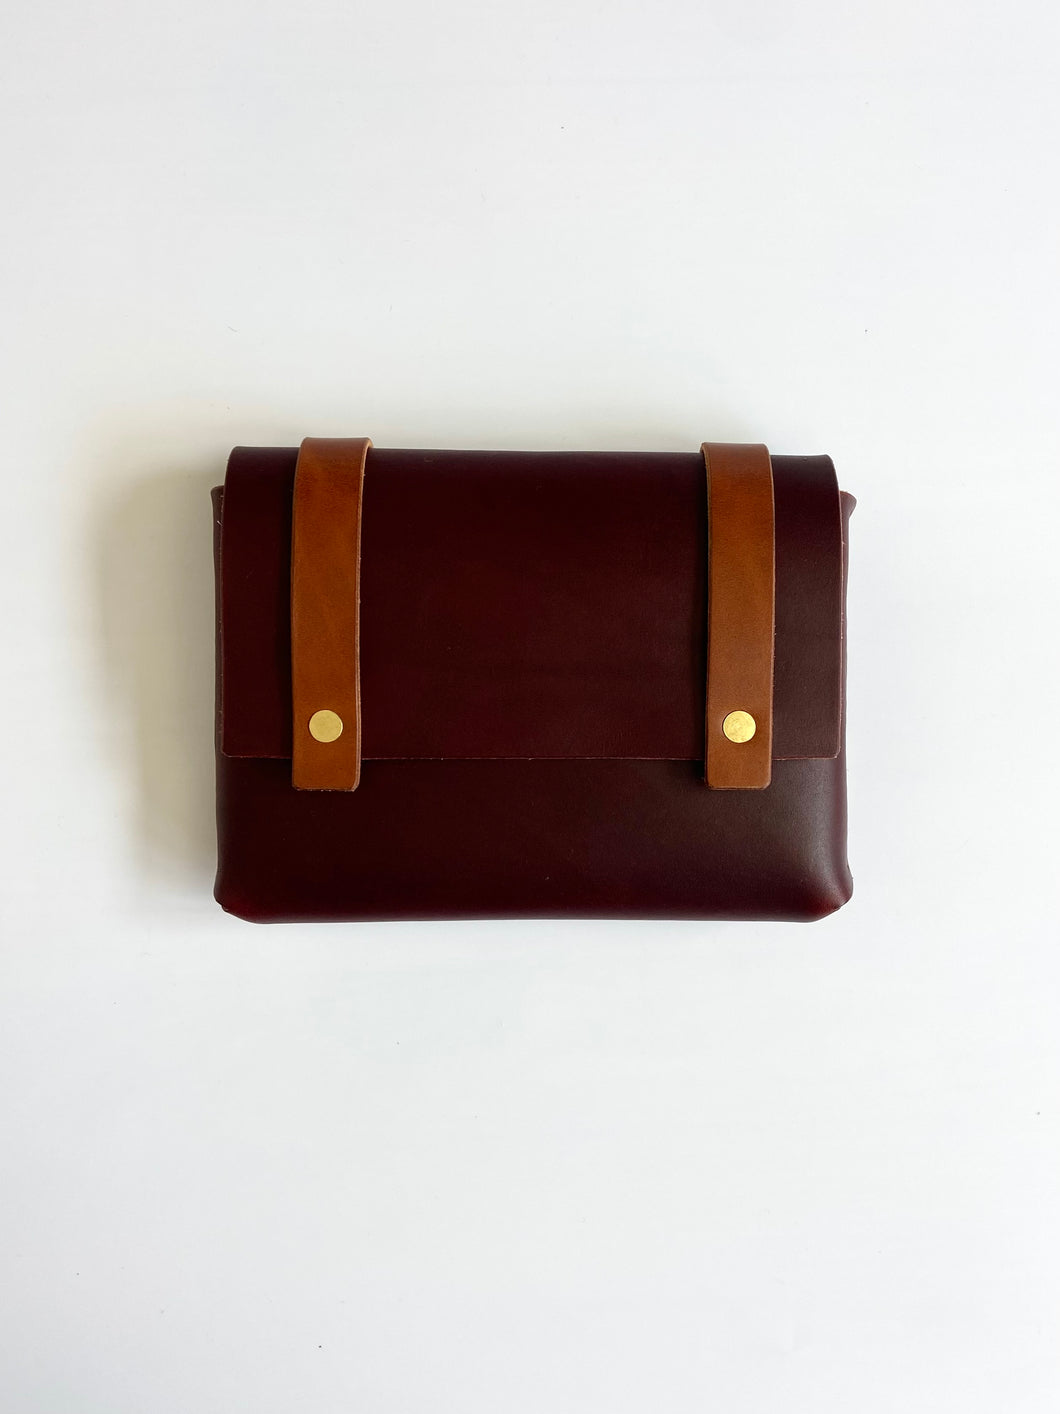 Mini Clutch in Burgundy Vegetable Tanned Leather with Cognac Straps